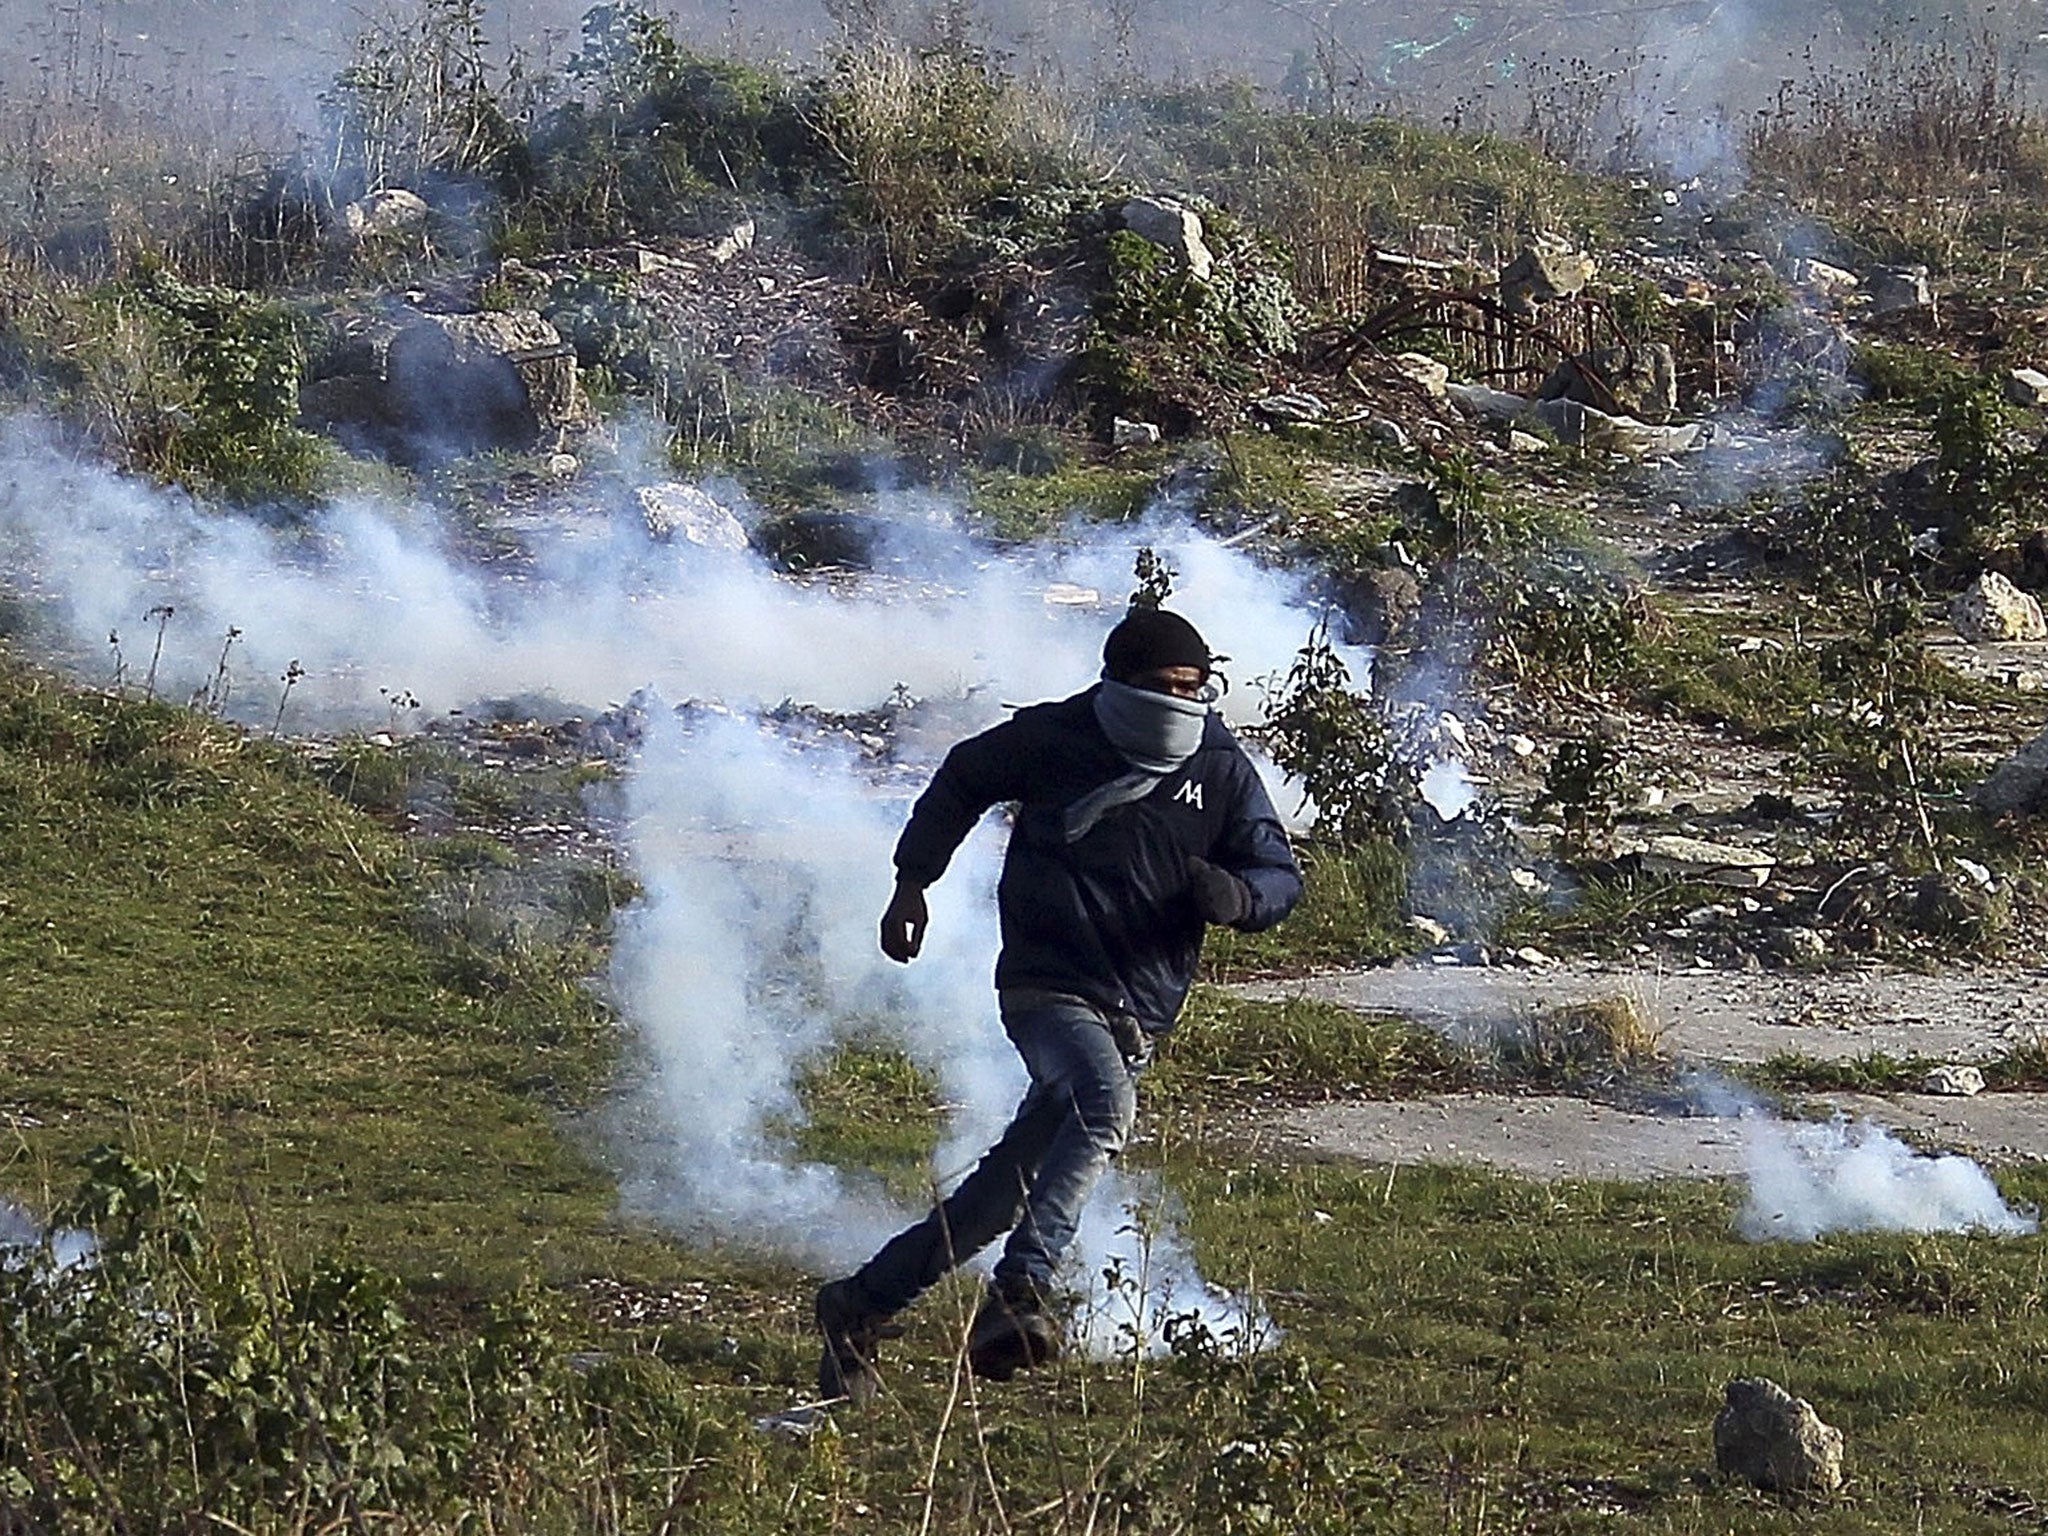 A migrant runs away from tear gas thrown by police forces near the Channel Tunnel in Calais